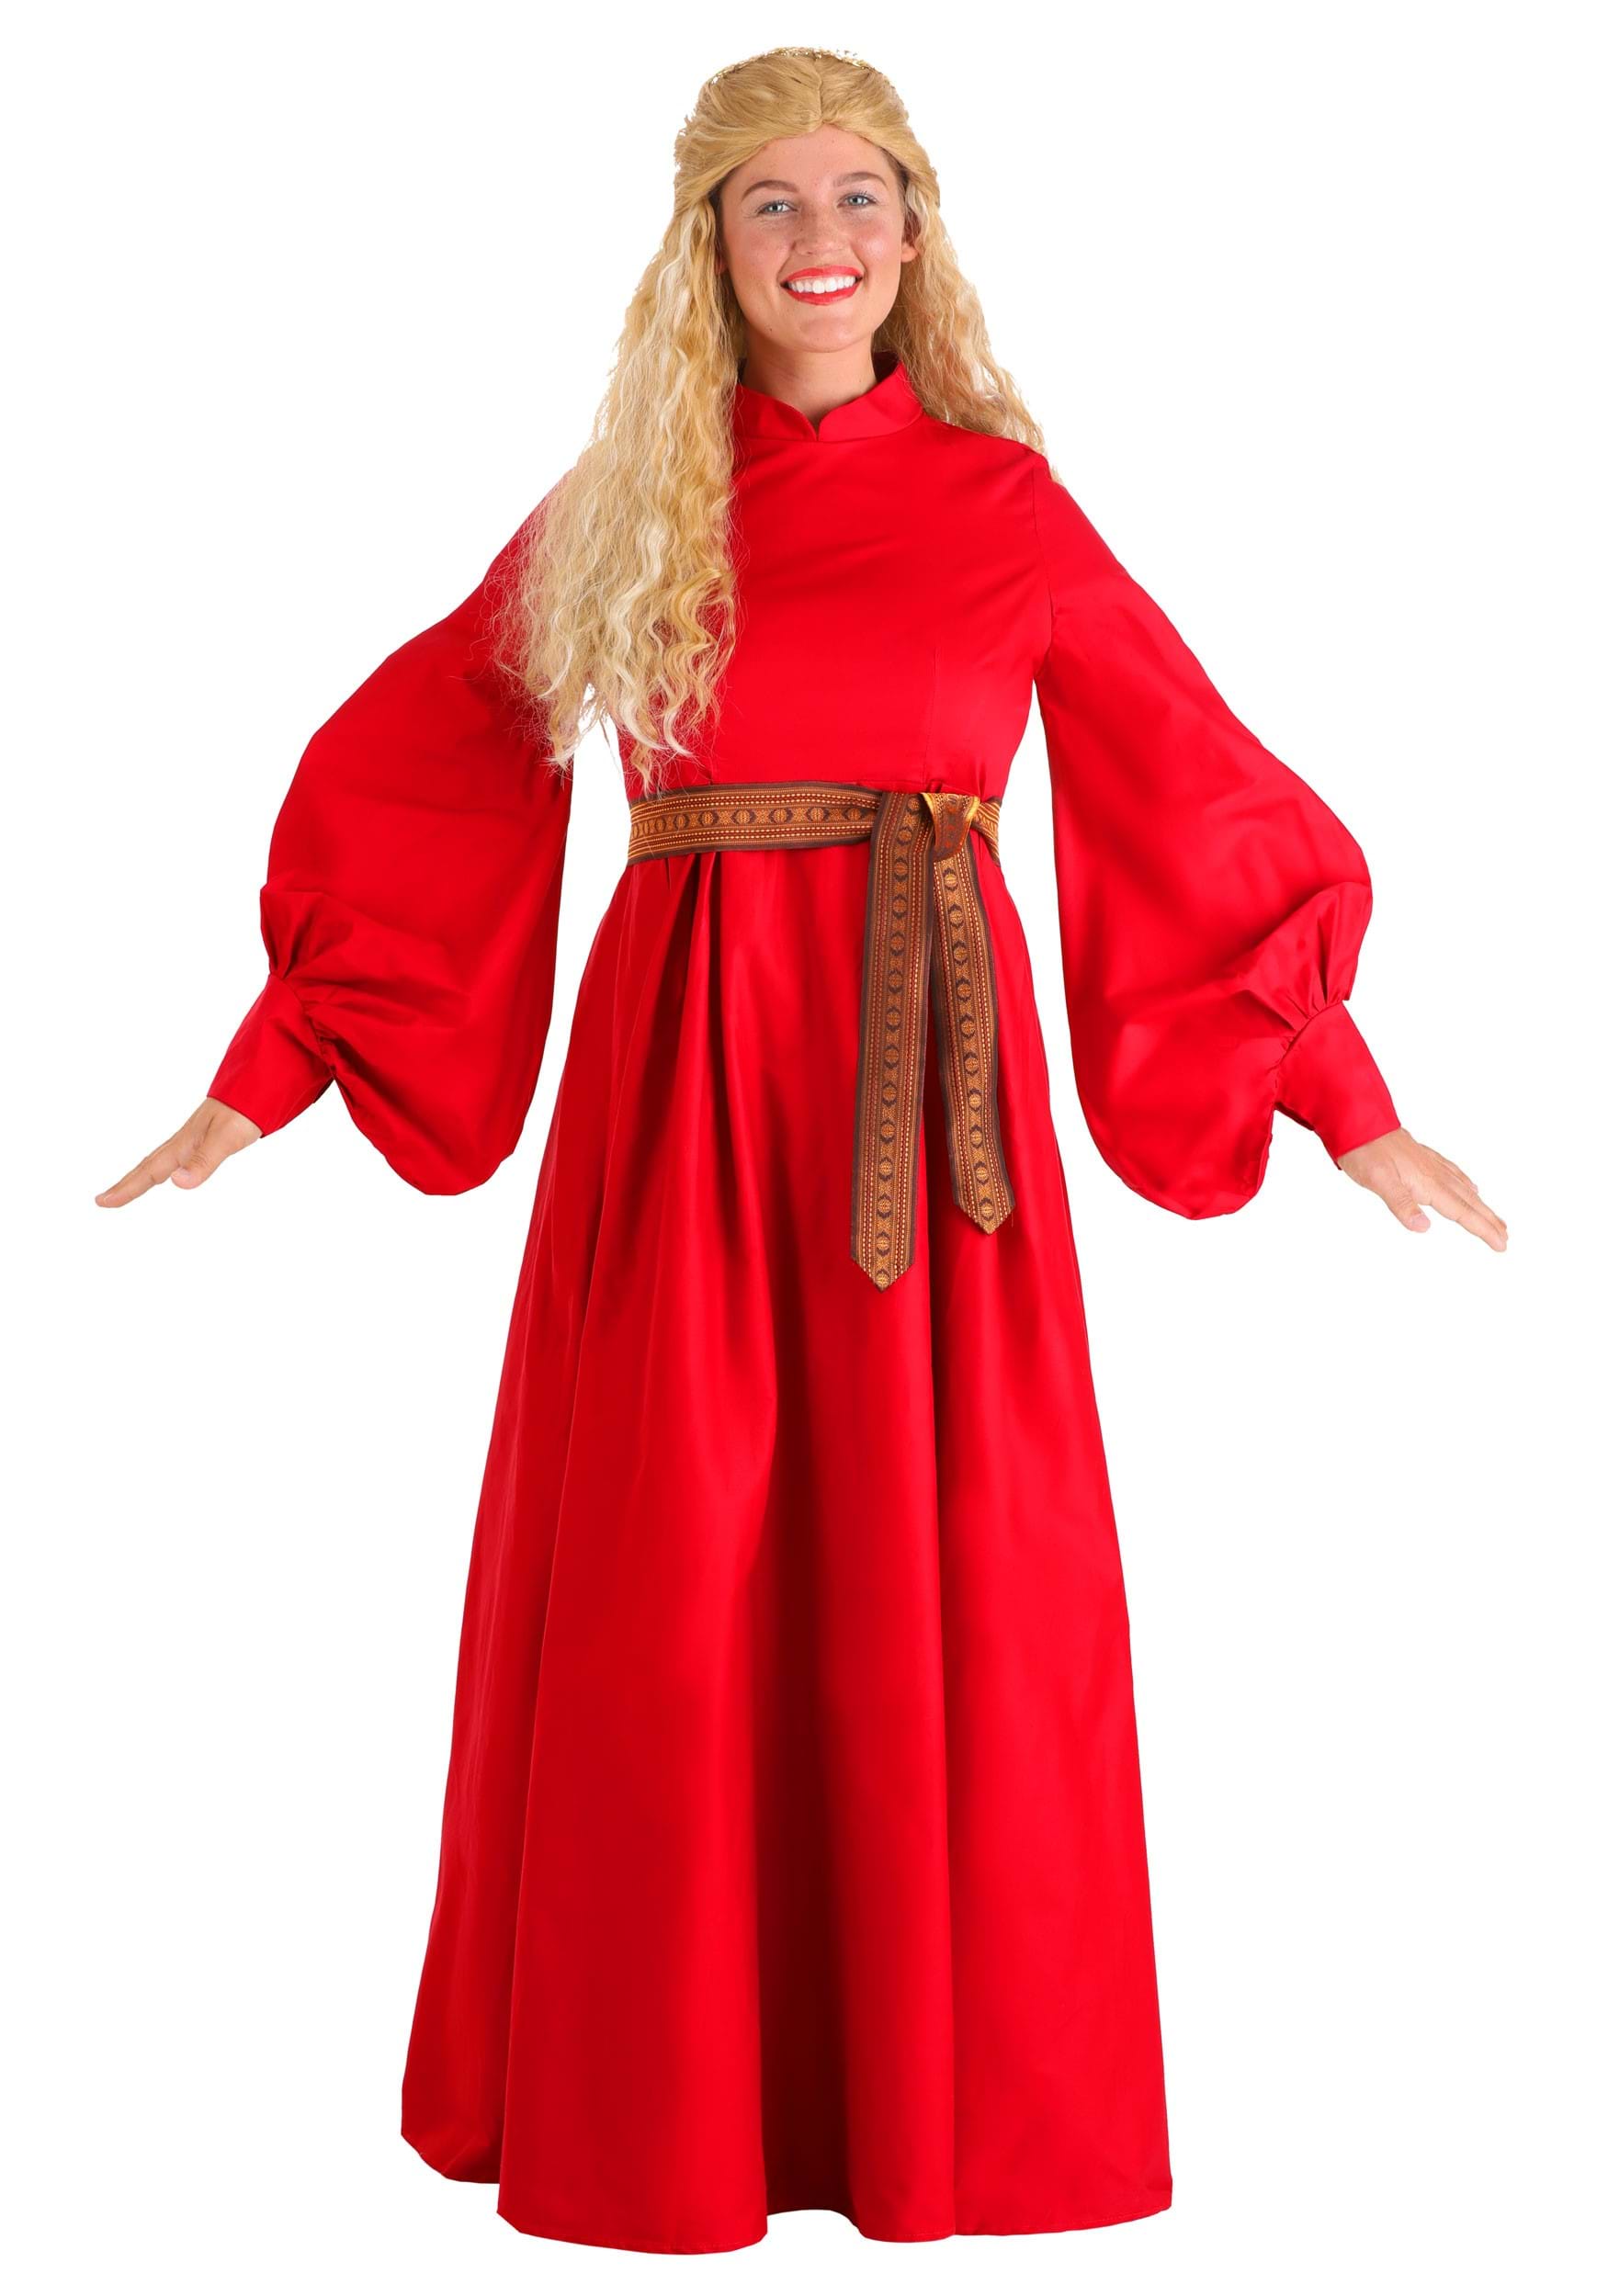 Princess Bride Costume For Women Red Buttercup Dress